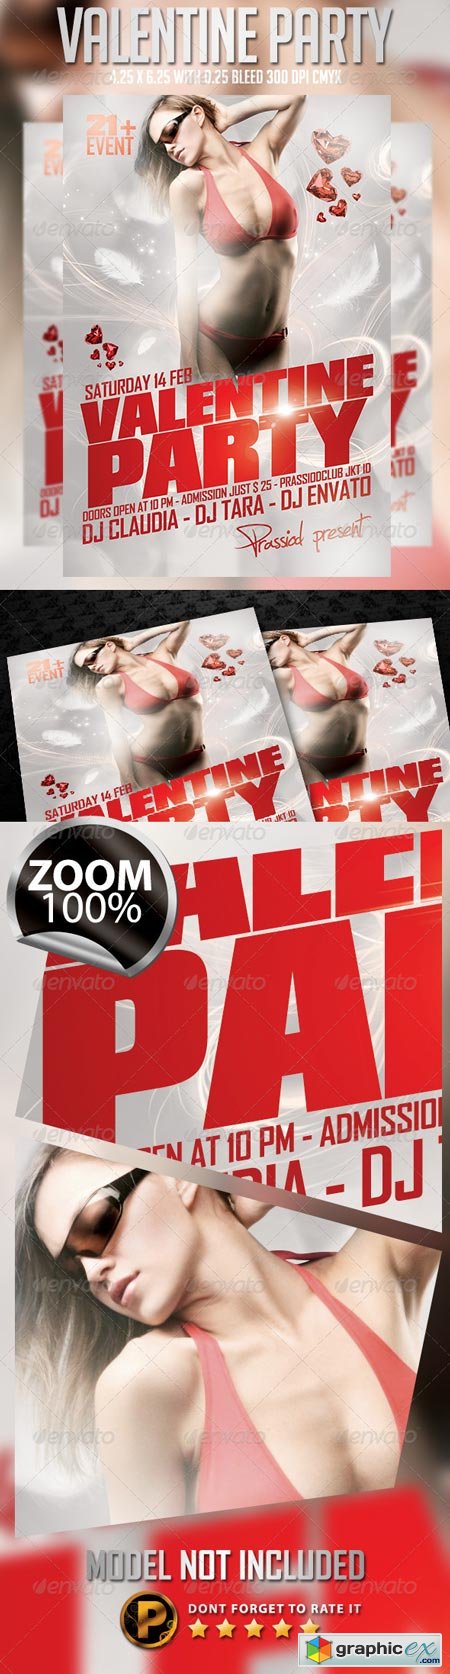 Valentine Party Flyer Template 6283936